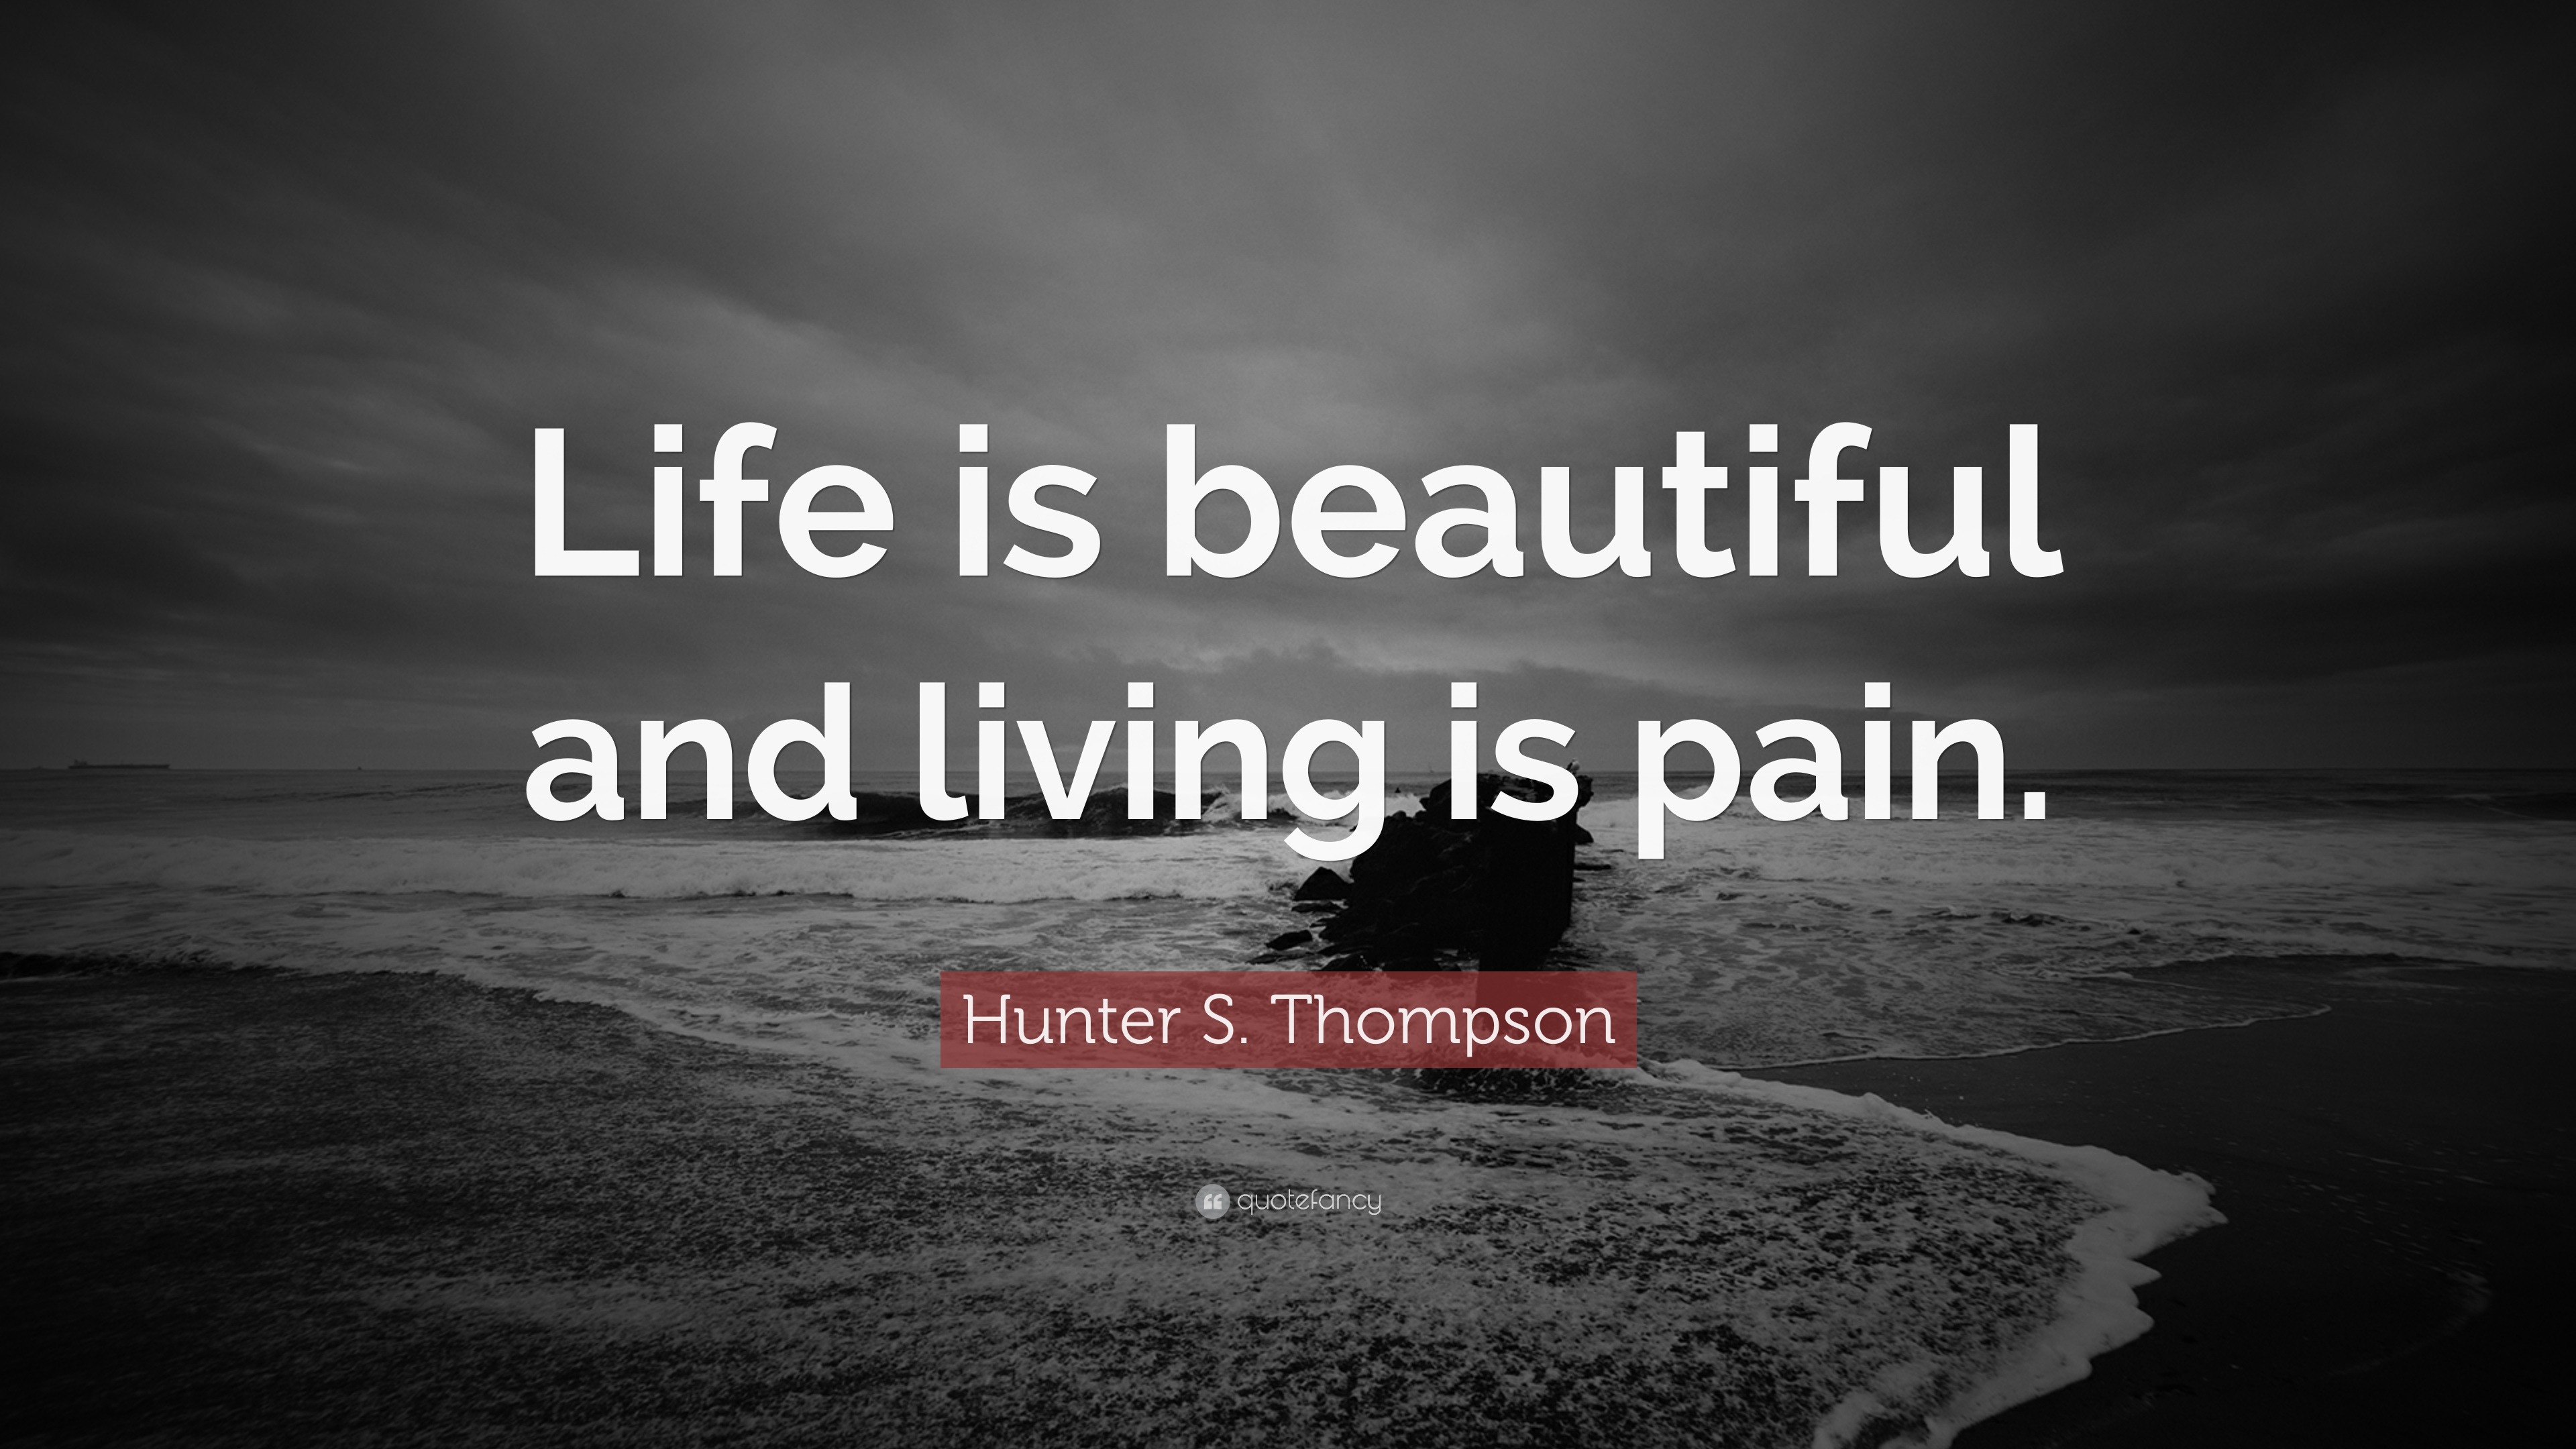 608464 Life is beautiful and living is pain  Hunter S Thompson quote   Rare Gallery HD Wallpapers